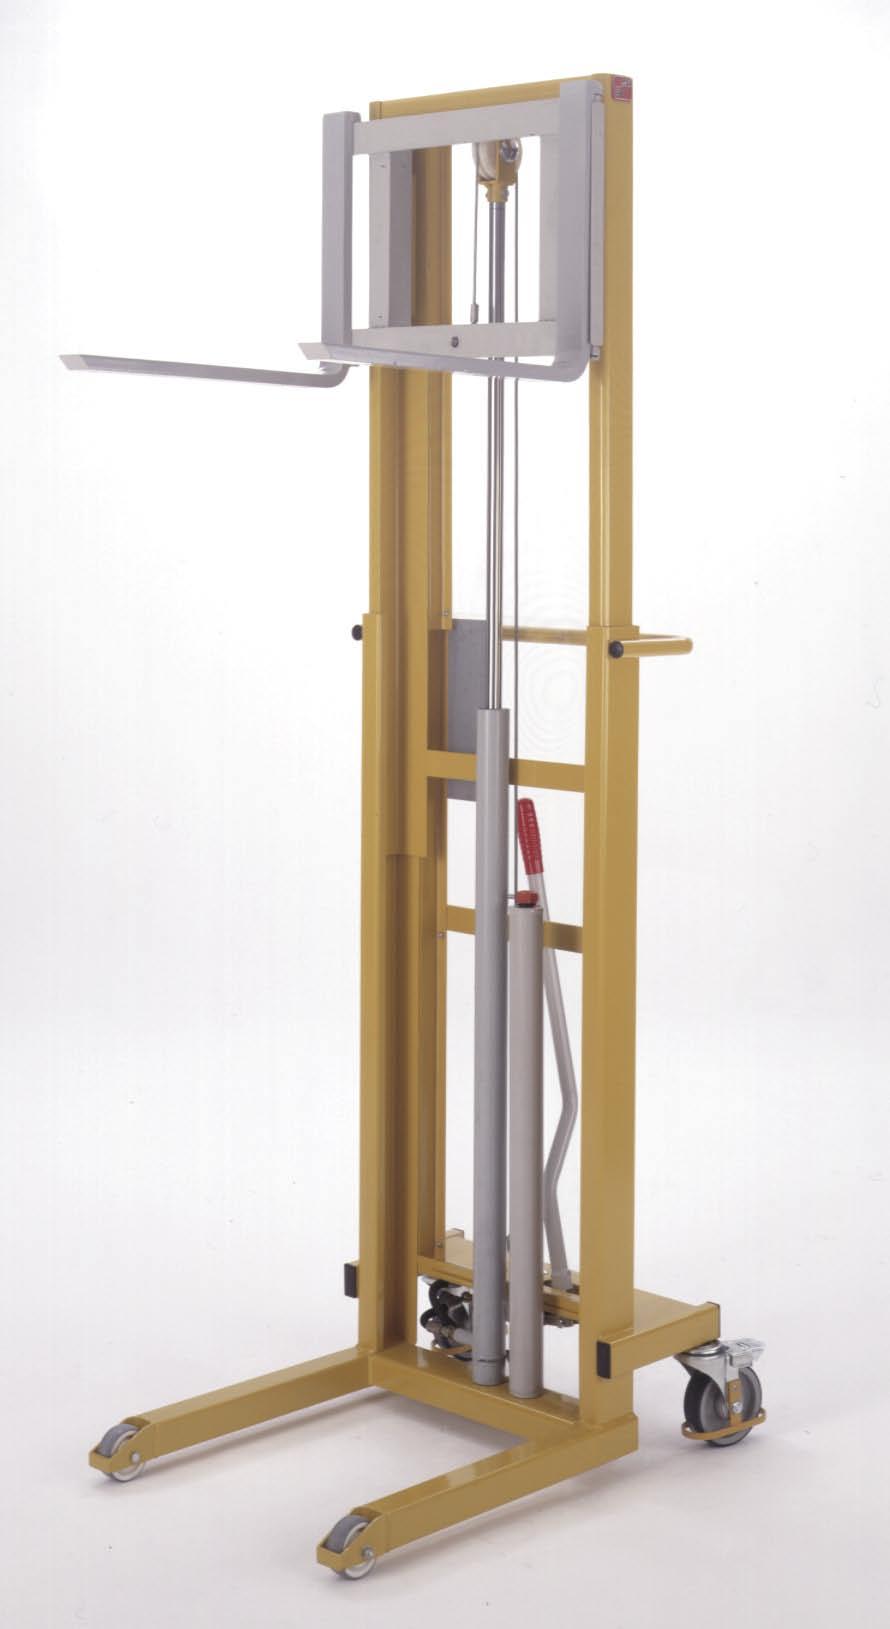 Industrial Telescopic - hand hydraulic 141 Capacity 250kg Hand hydraulic Telescopic twin mast Lift height 1540mm Ideal for mobile general lifting and handling operations in both workshop and